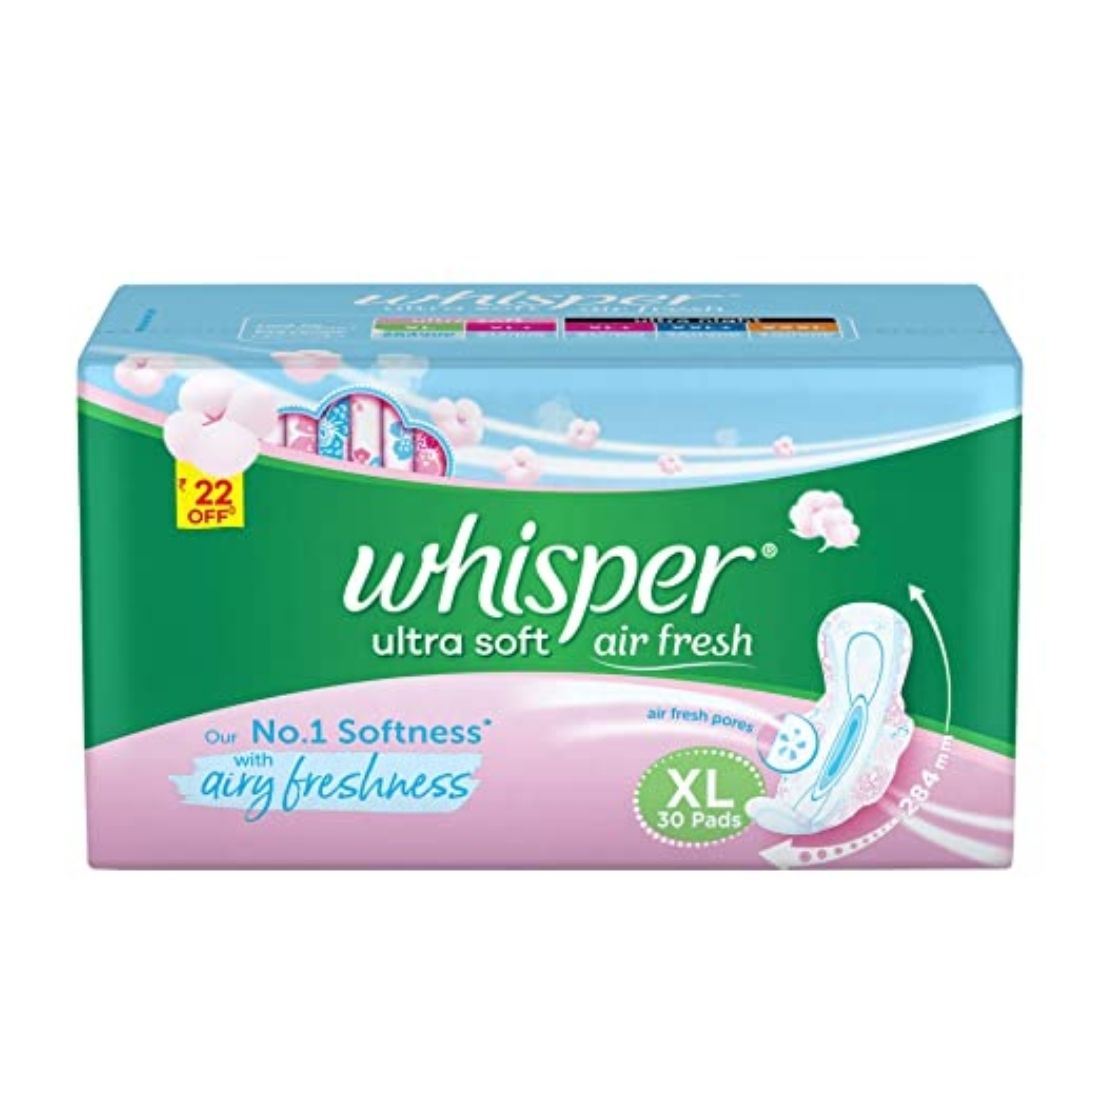 Buy Whisper Ultra Soft Sanitary Napkins, XL30 Online at Best Price in India